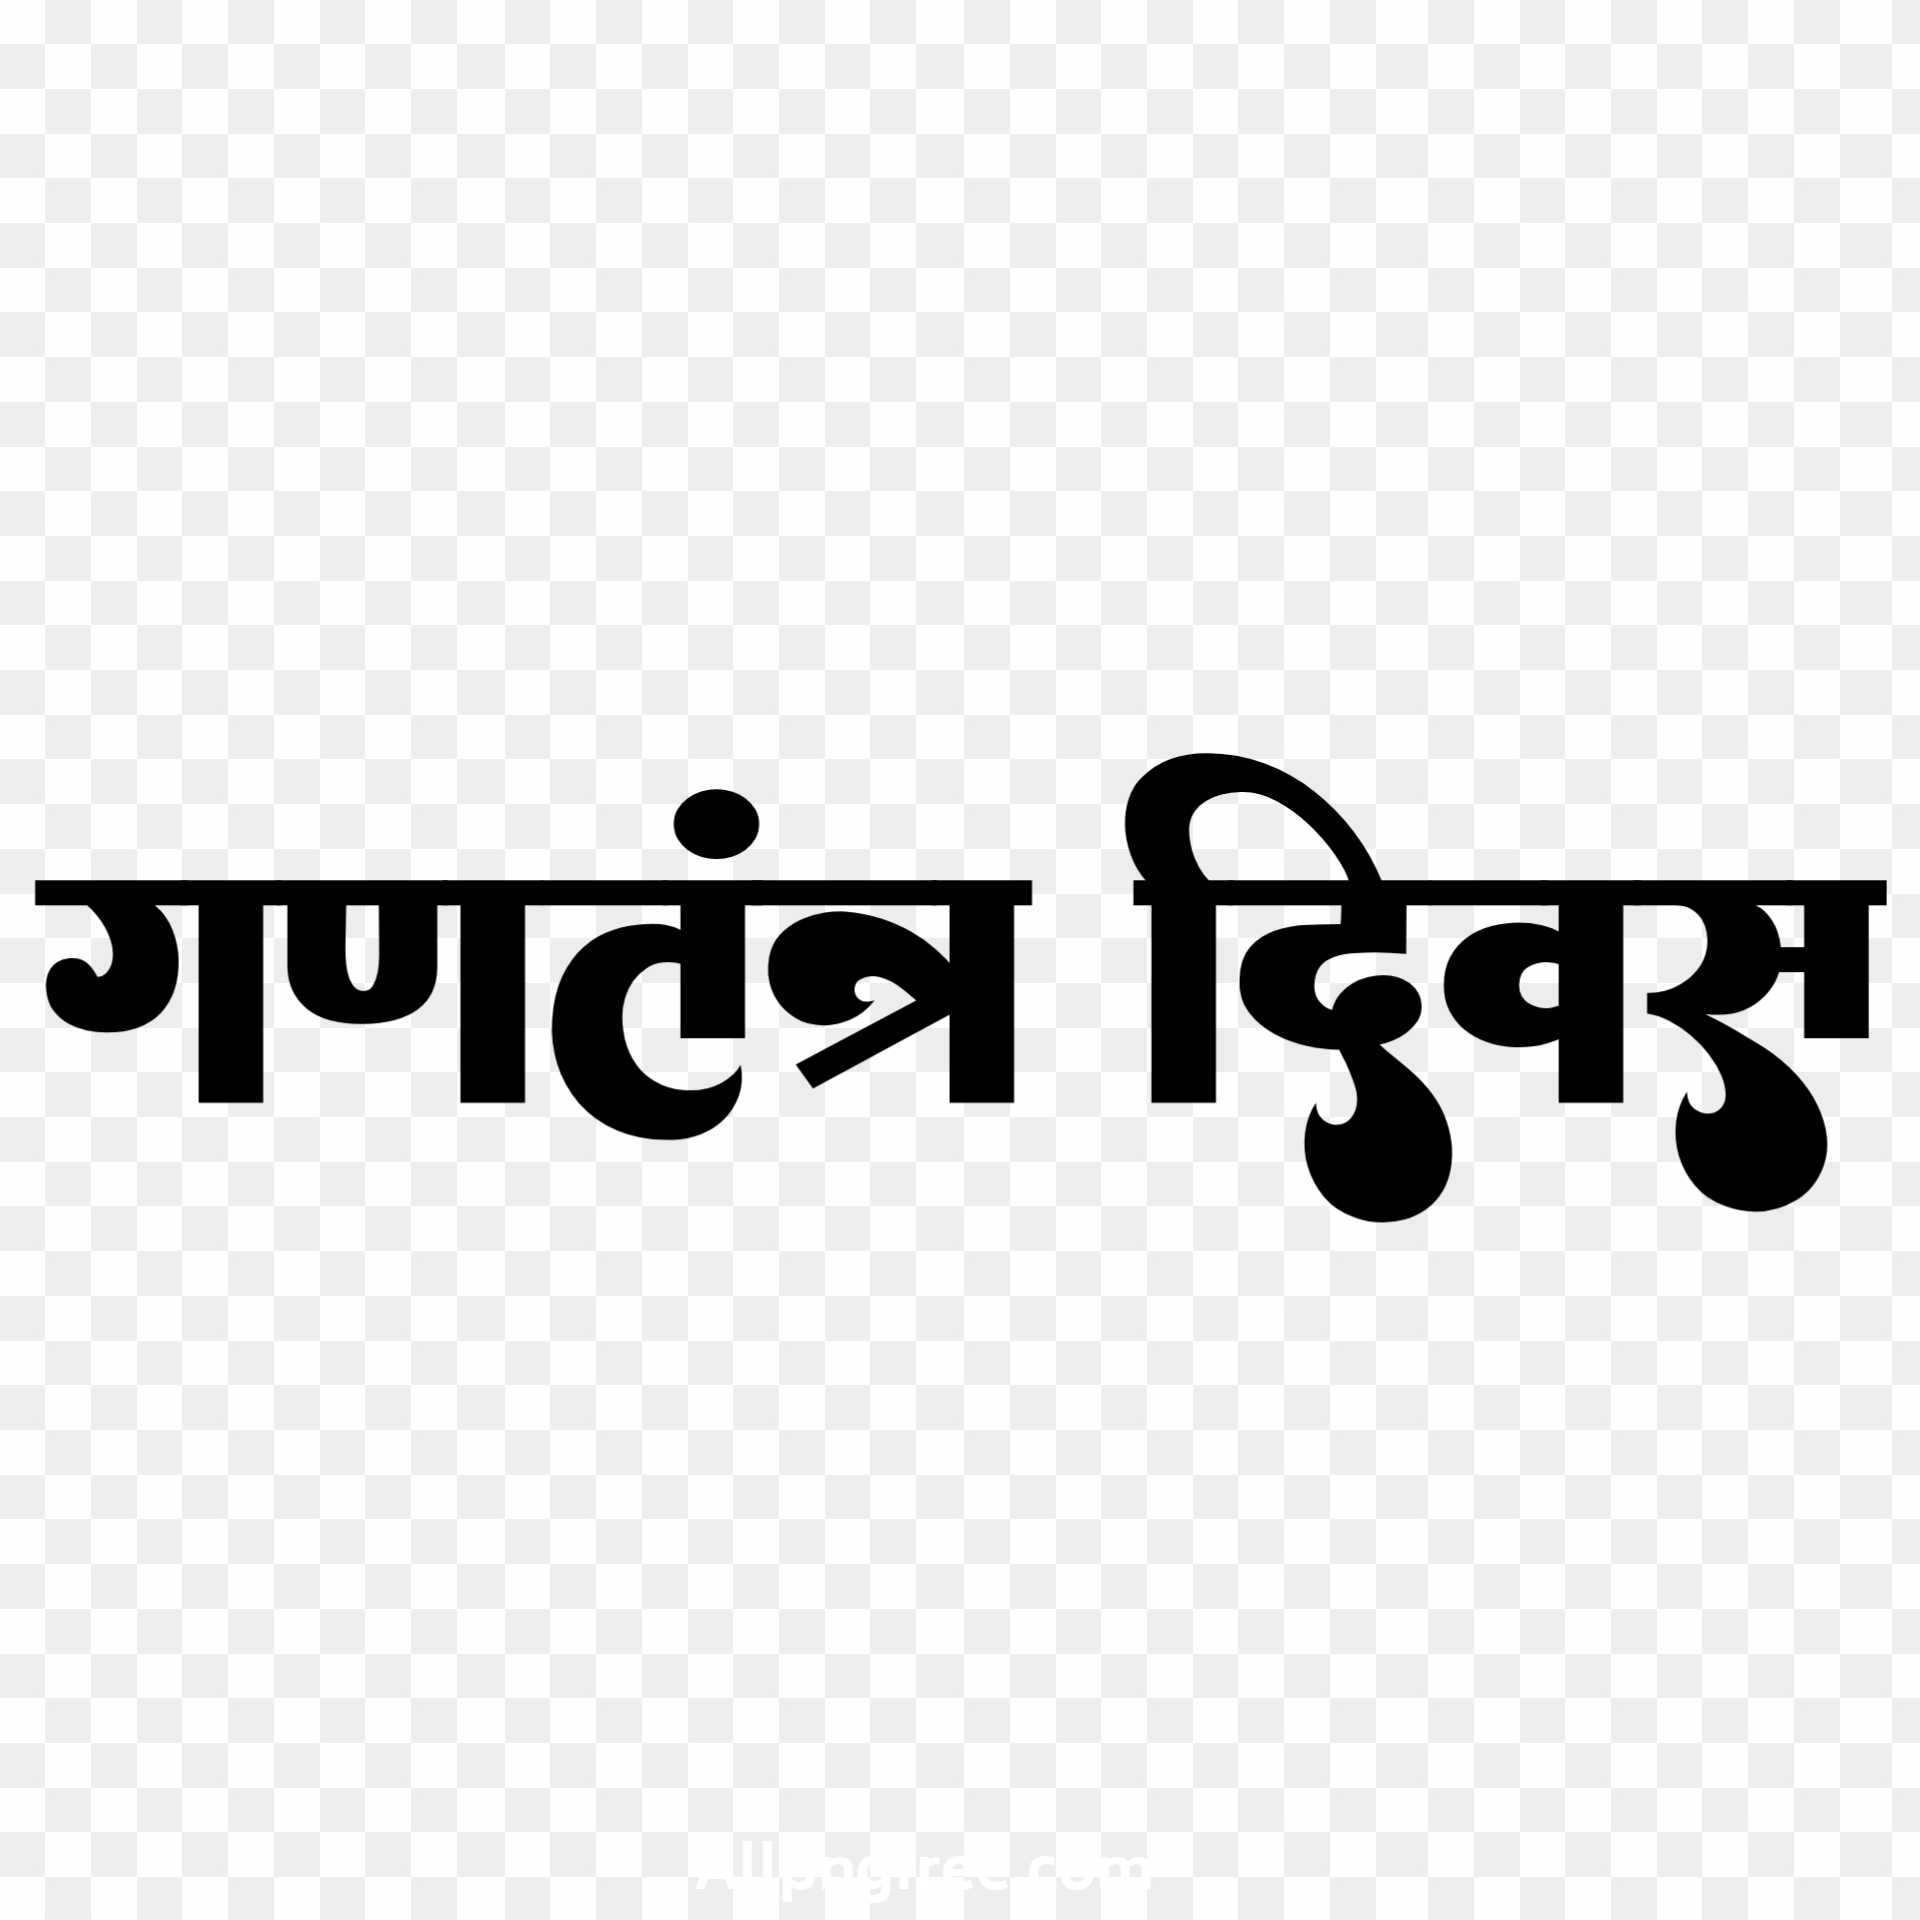 Hindi republic Day text PNG images download